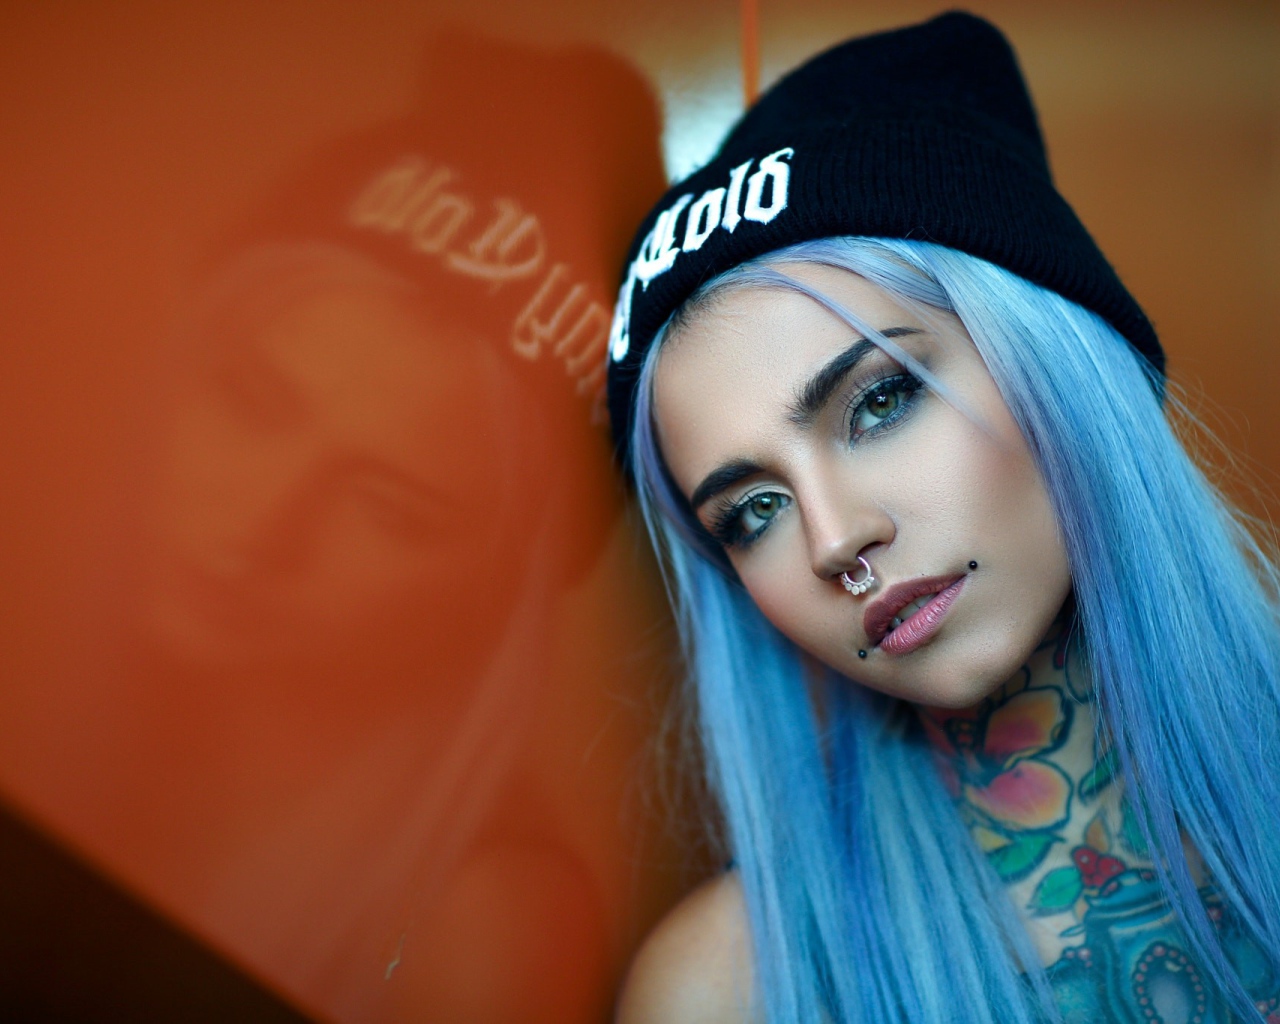 Girl with blue hair and piercing in the nose